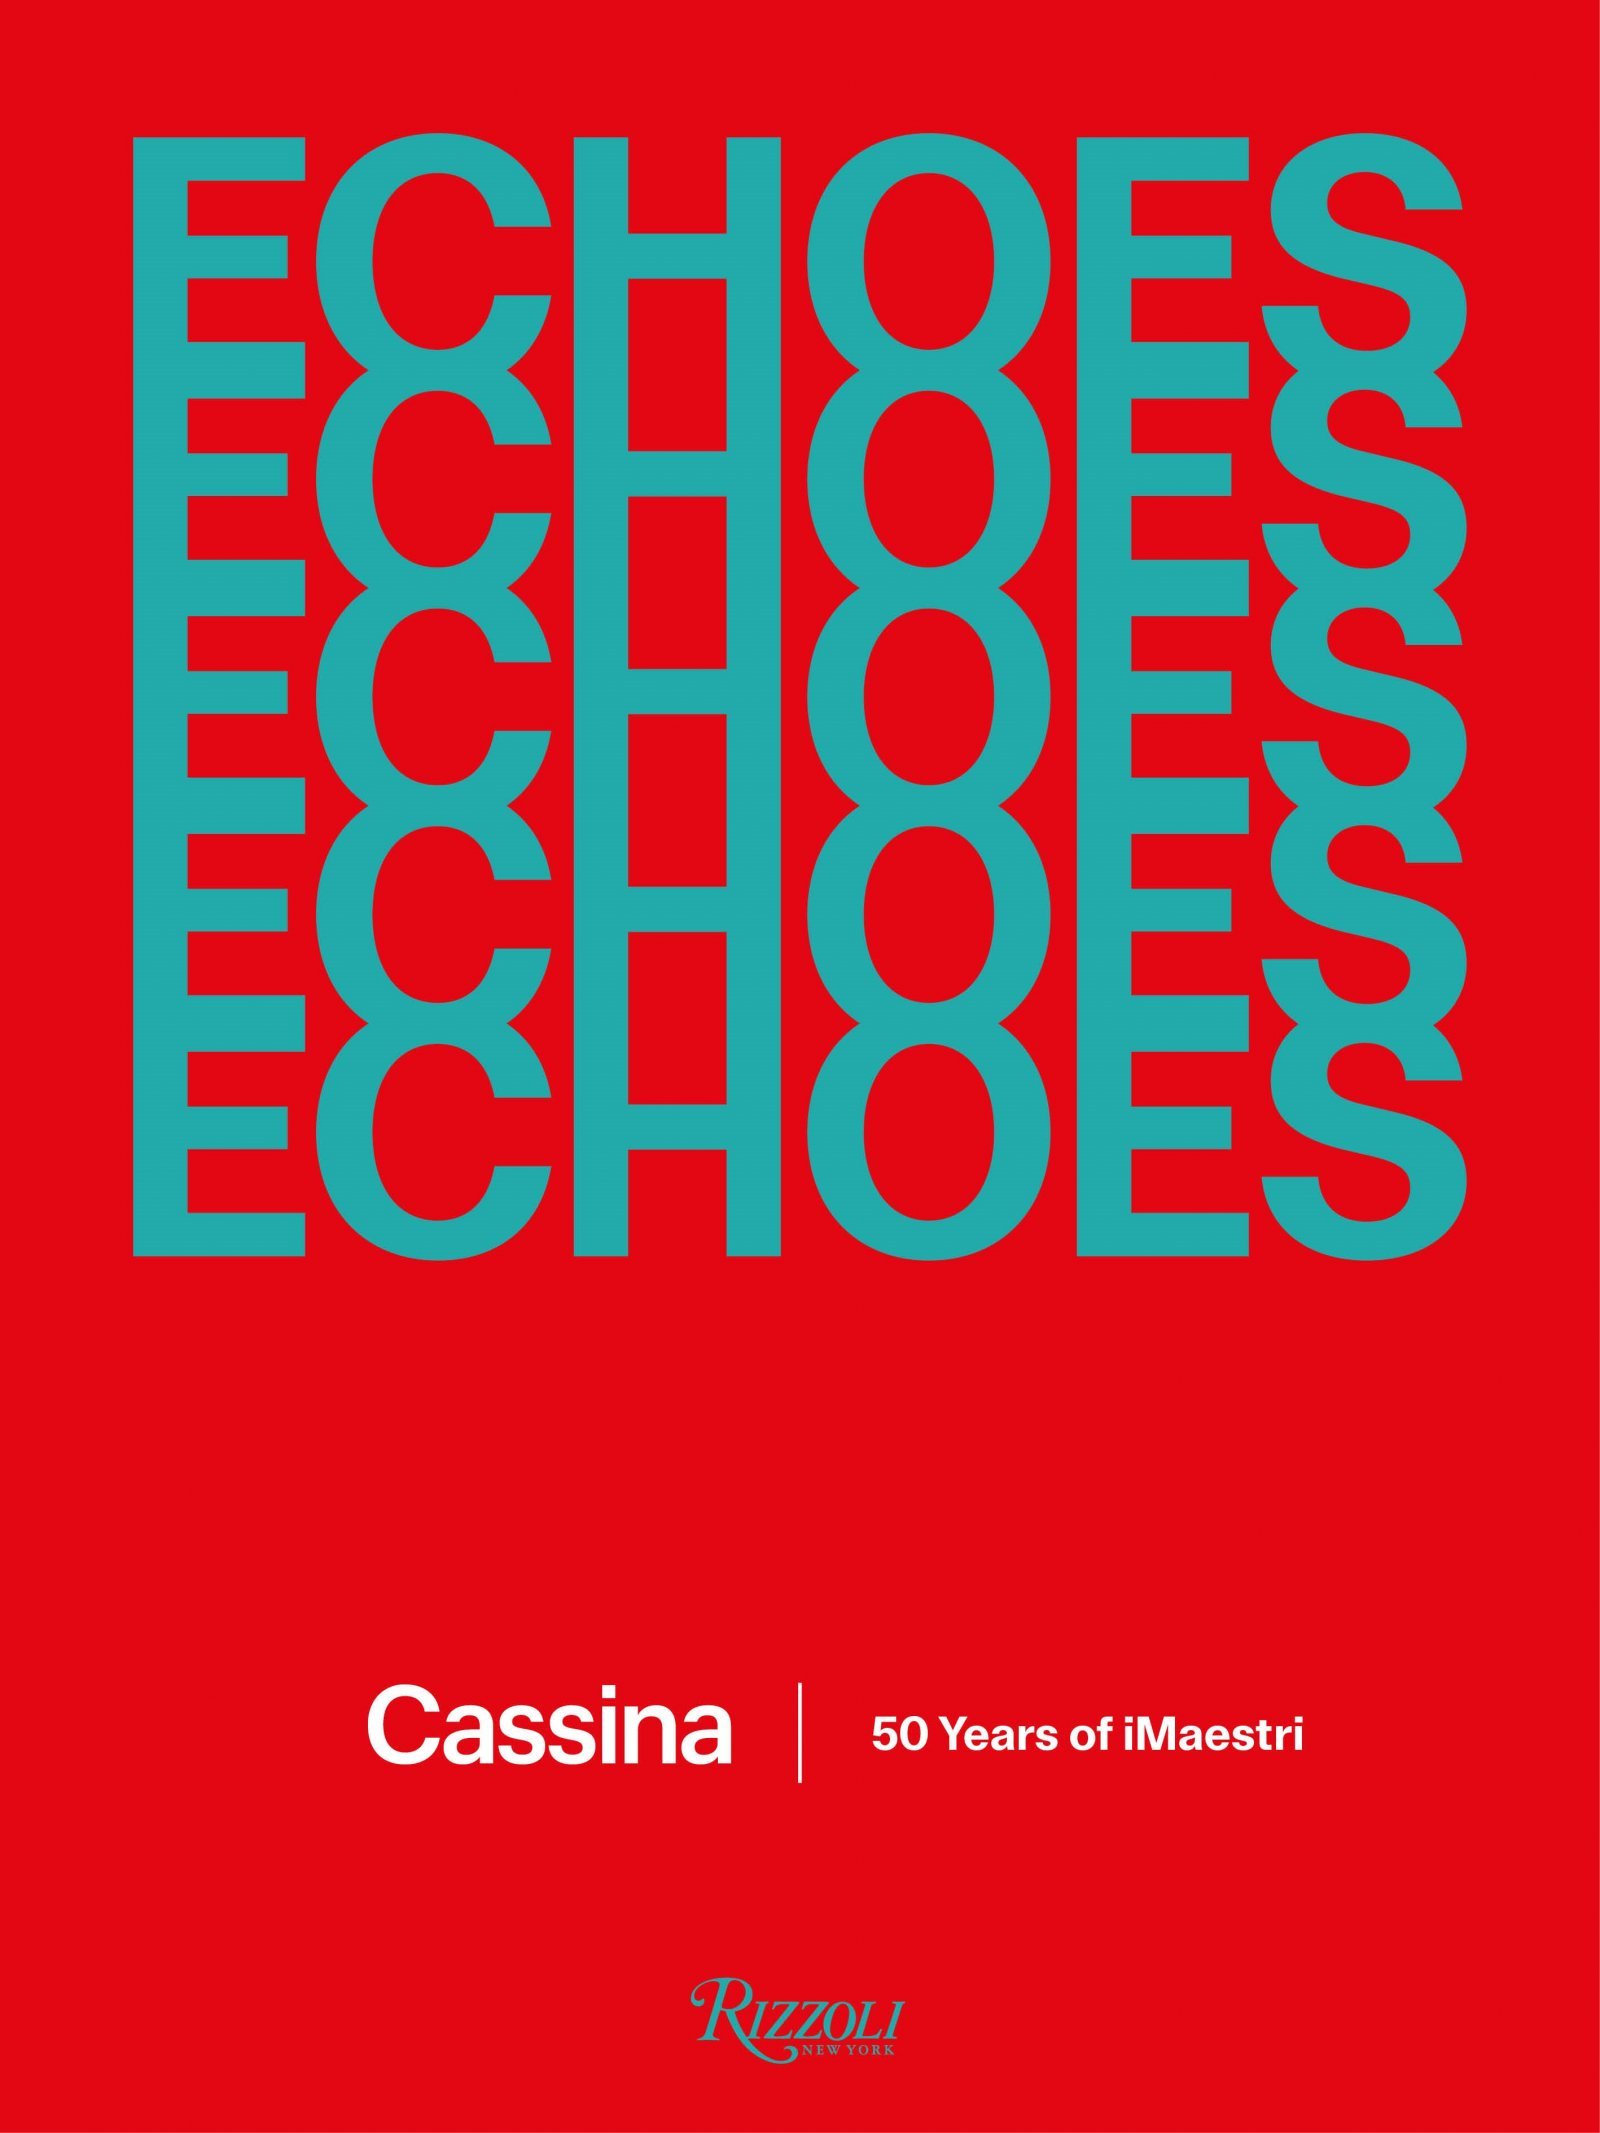 CASSINA_Echoes_50 Years of iMaestri_cover ENG.jpg